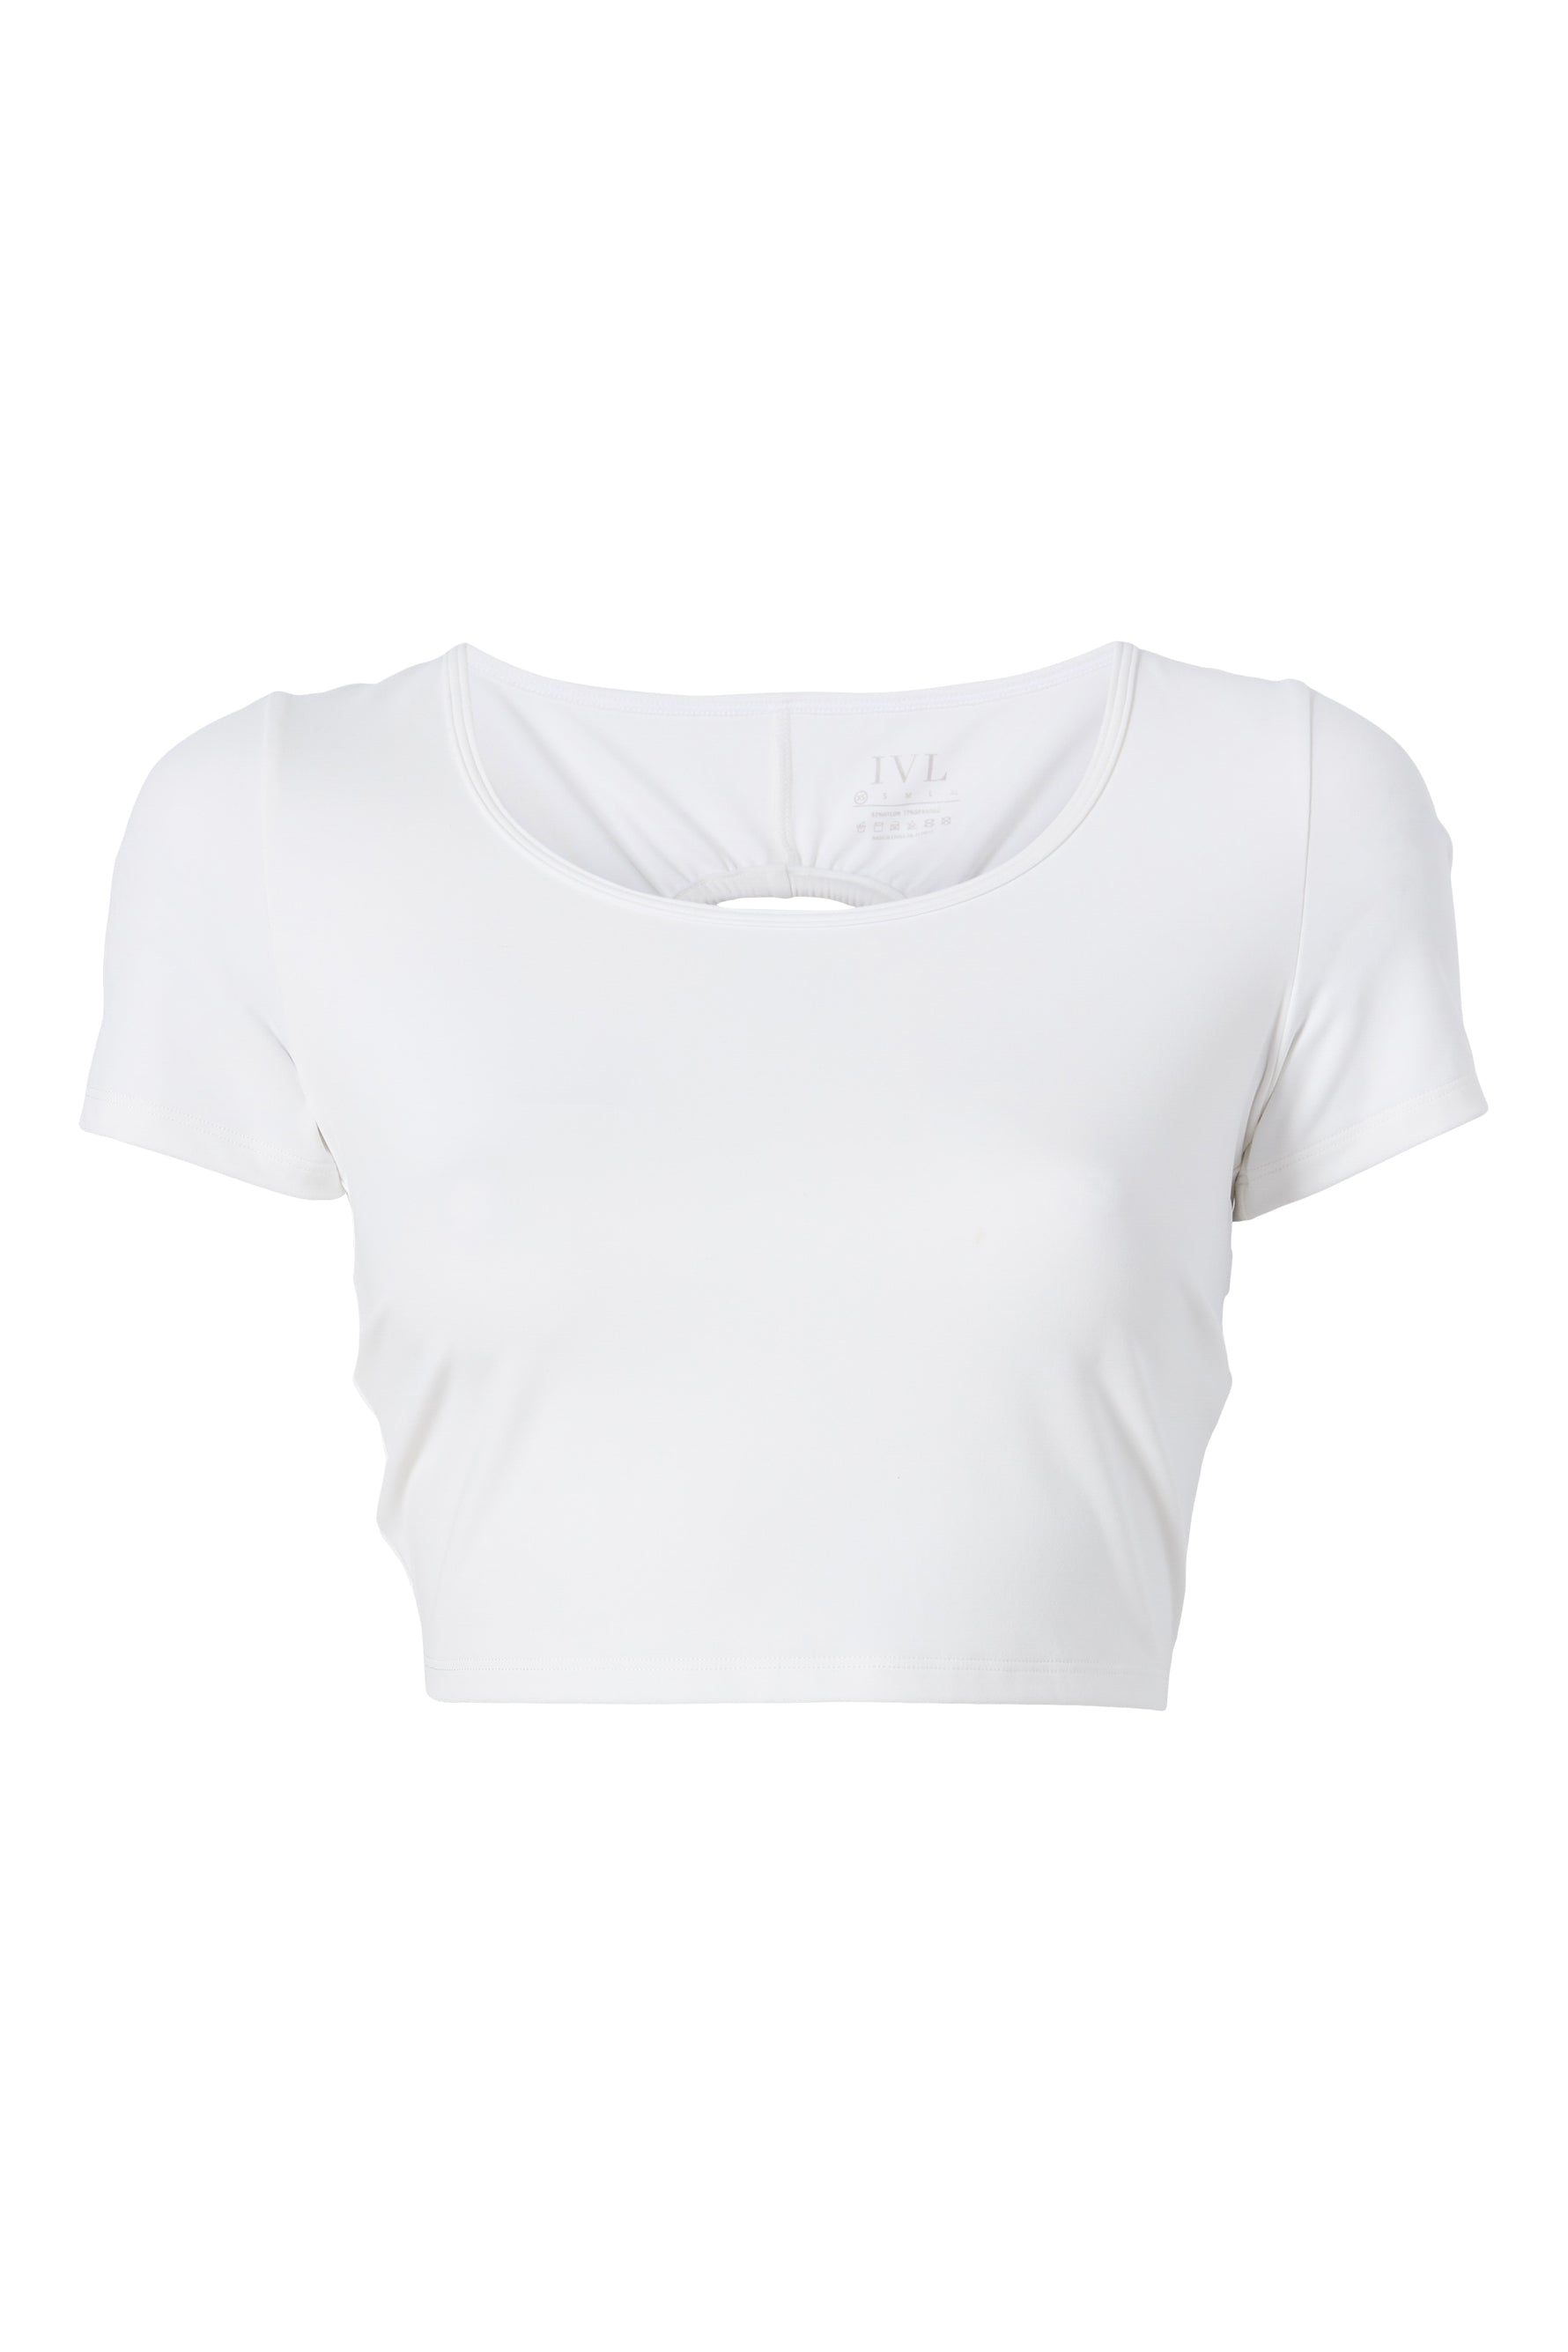 Ivl Collective Open Back Top T-Shirt in Brilliant White | Size Xs | Spandex/Nylon | Bandier